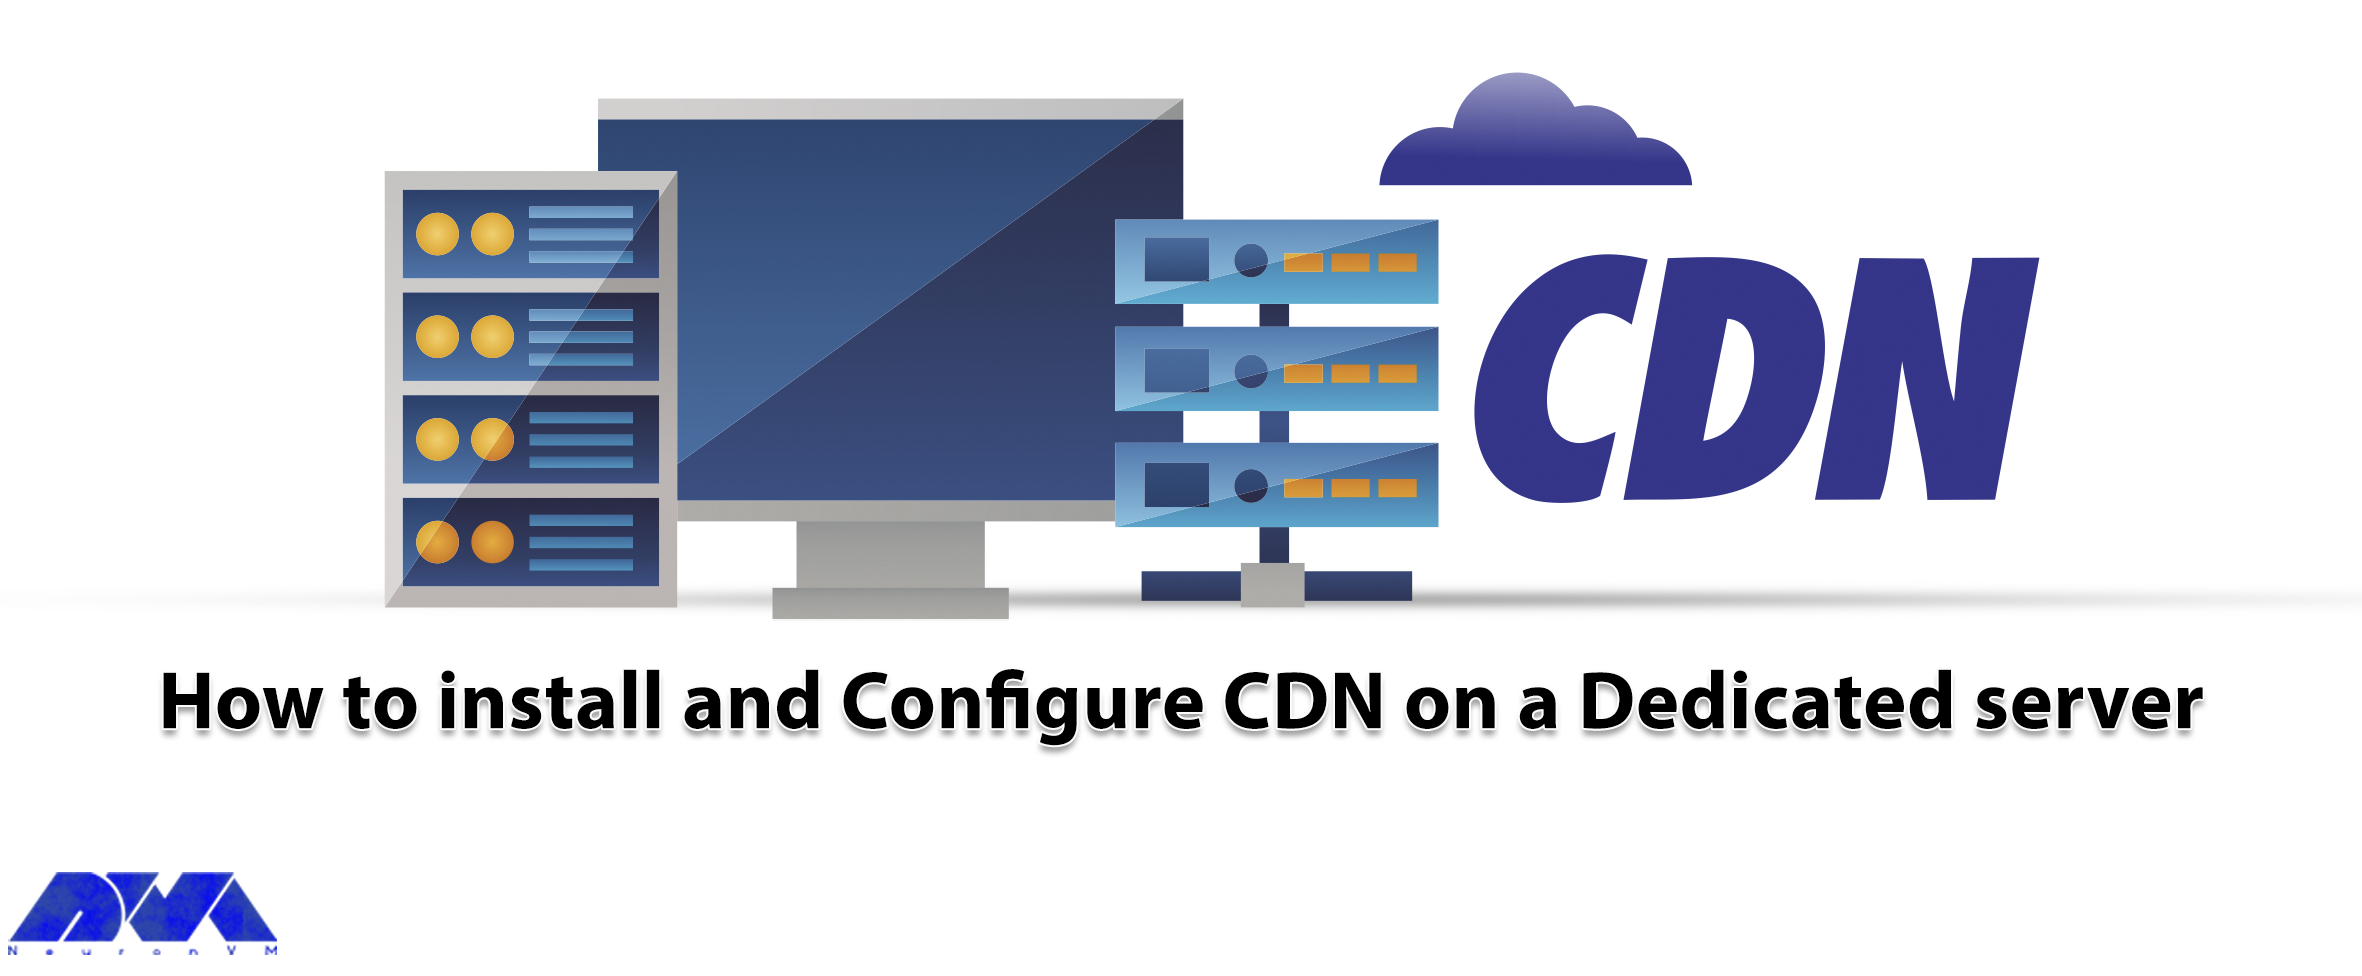 How to install and Configure CDN on a Dedicated server